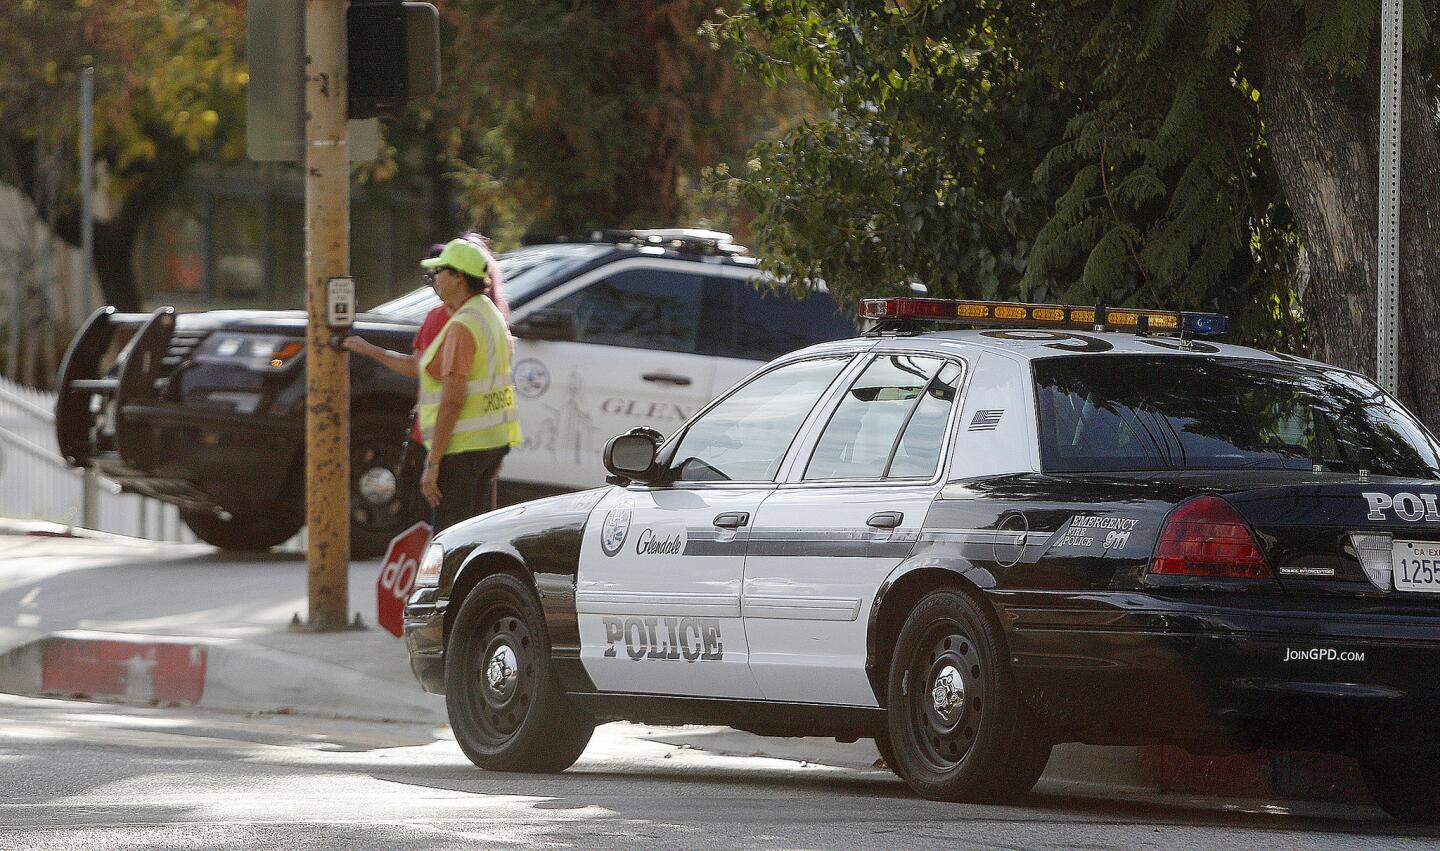 Photo Gallery: Bomb scare at Verdugo Woodland Elementary School in Glendale